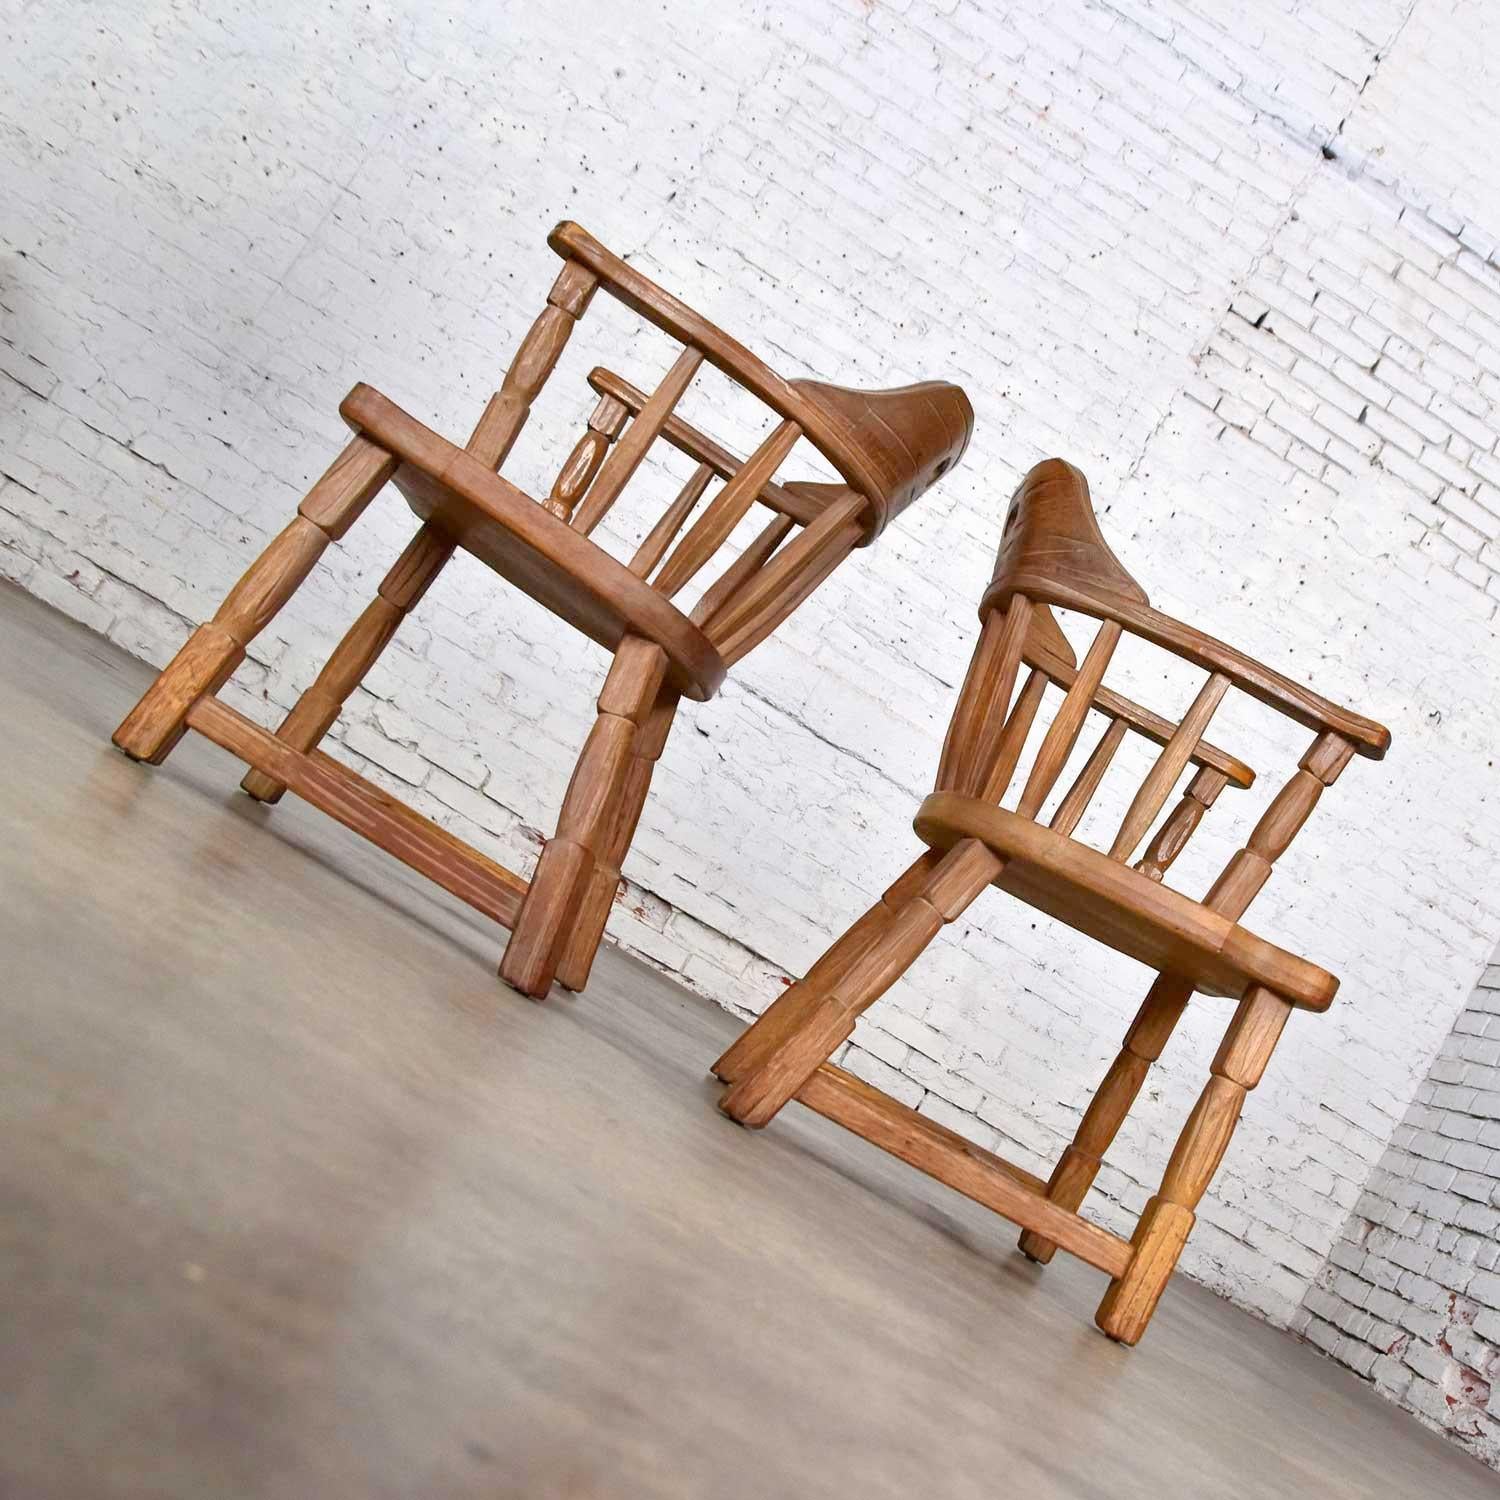 Rustic Ranch Oak Captains Armchairs by A. Brandt in Natural Oak Finish a Pair